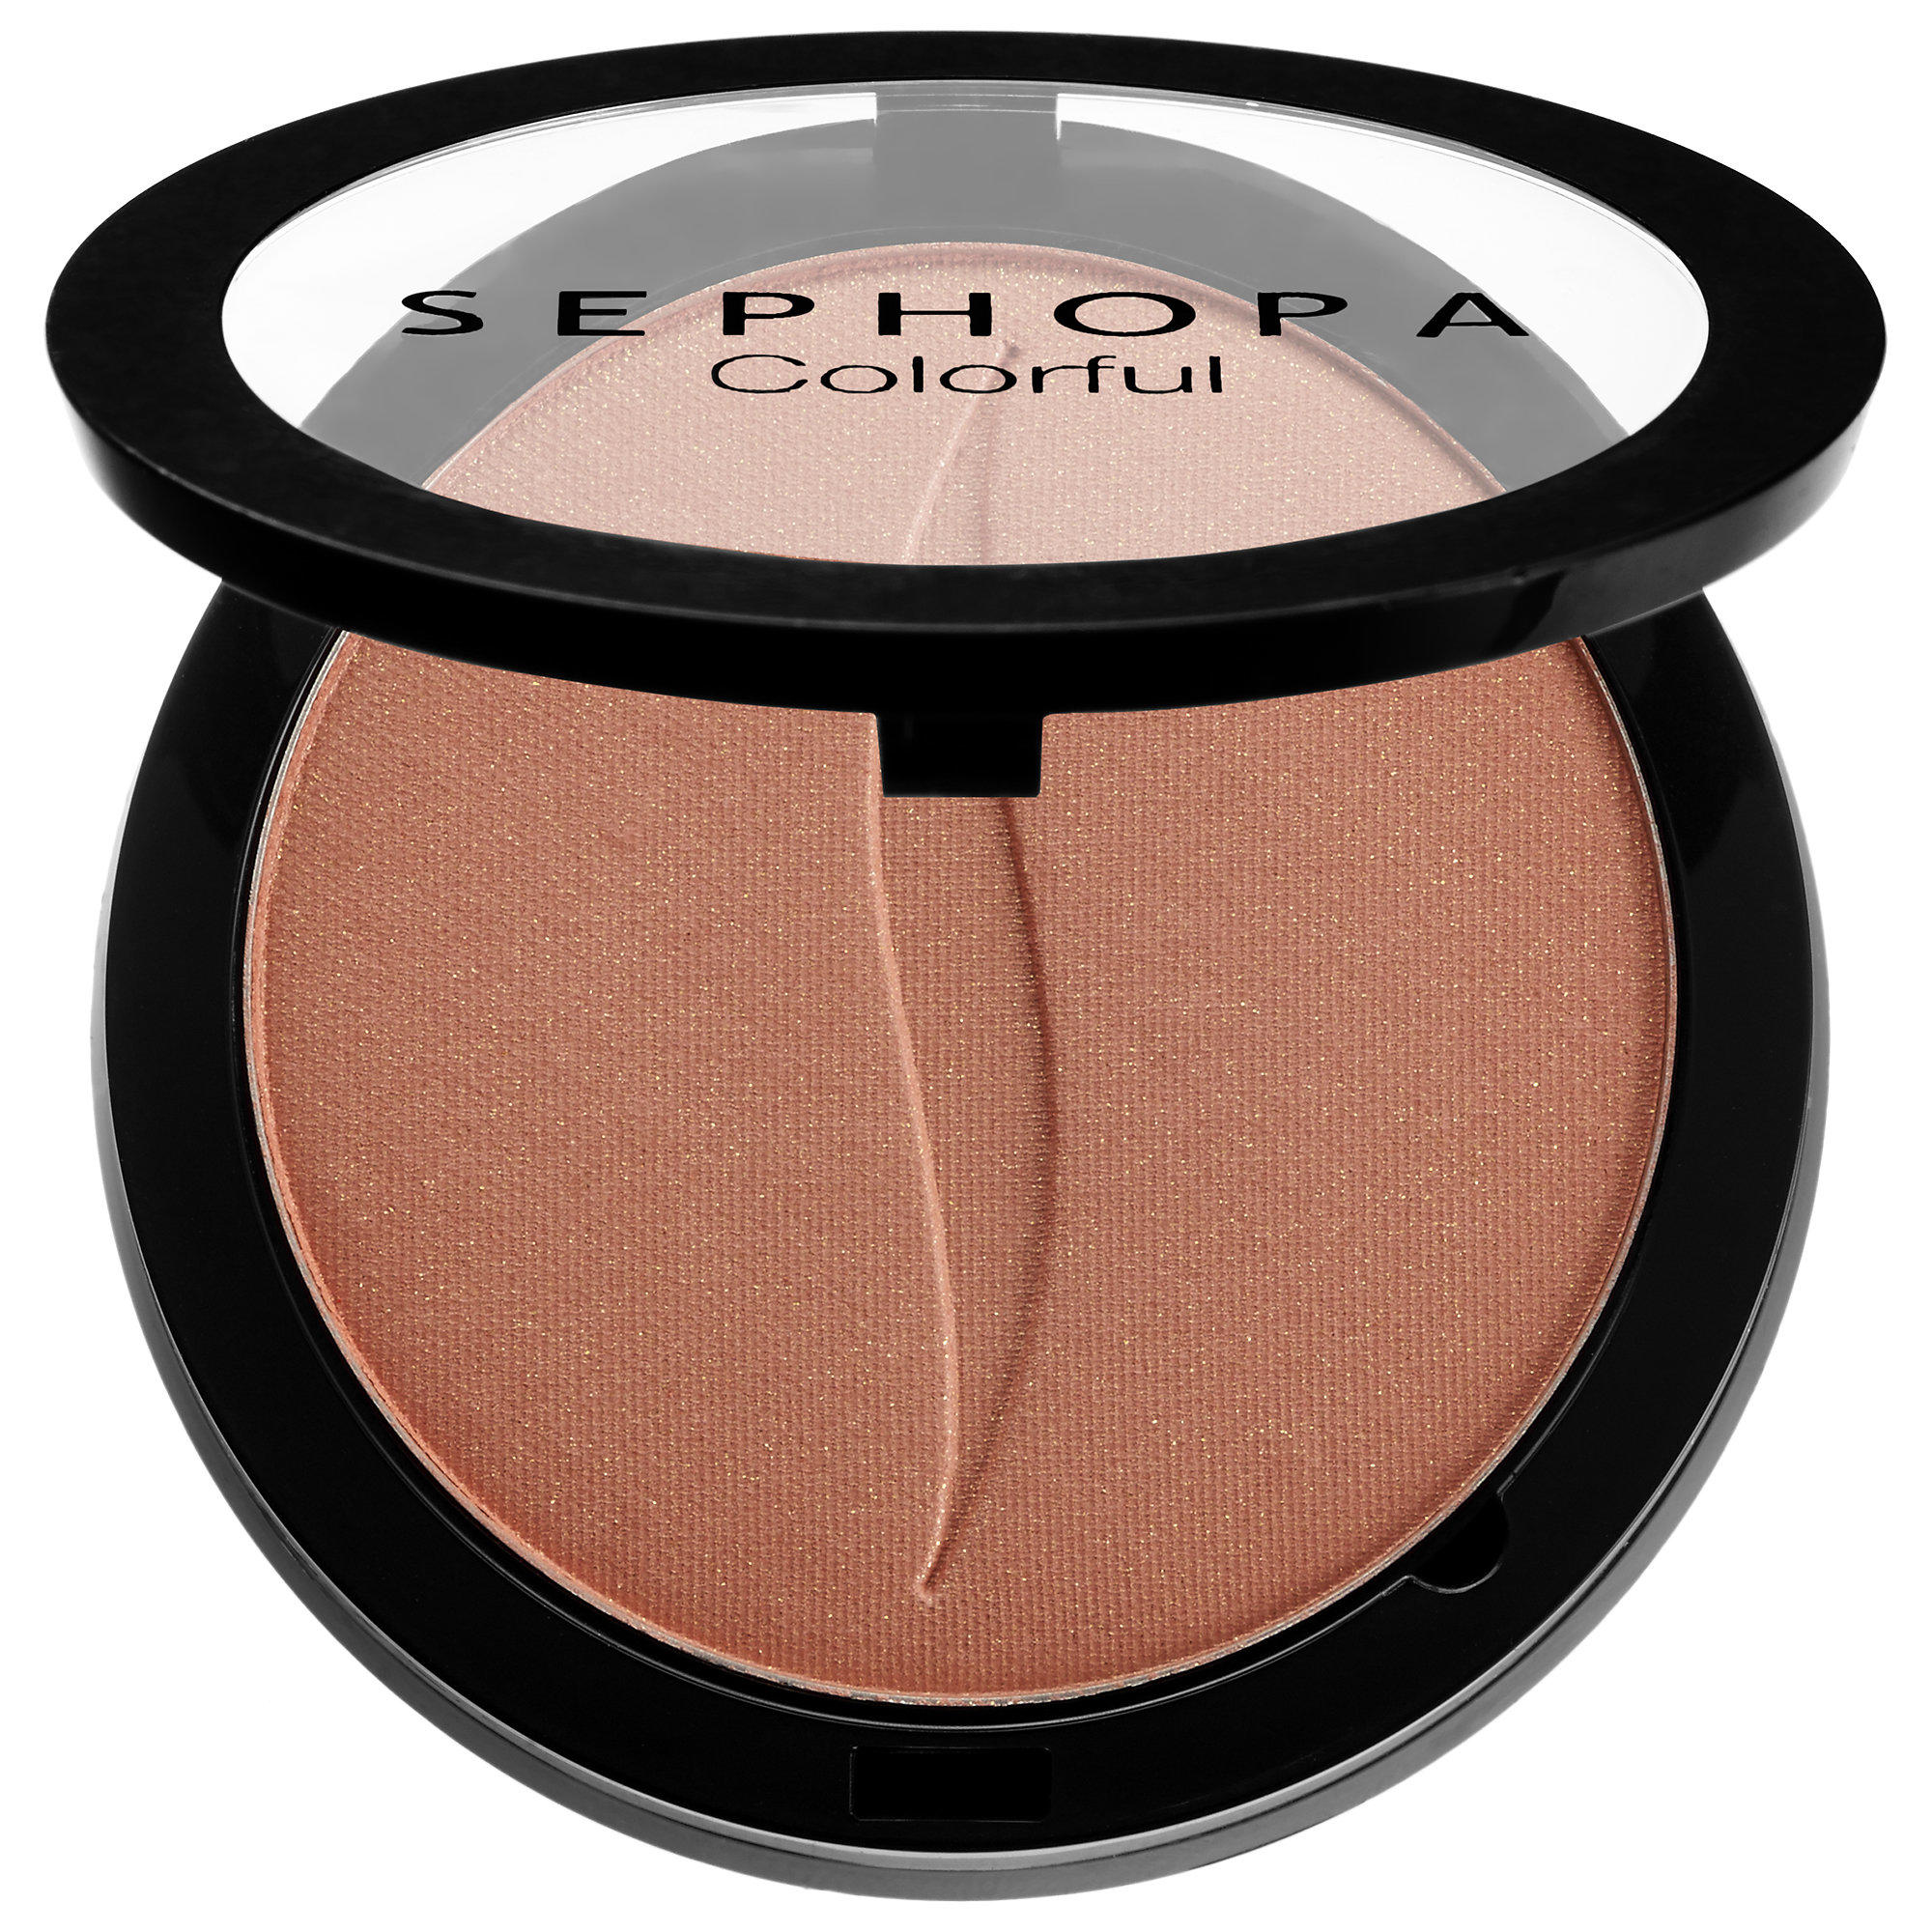 Sephora Colorful Face Powders Blush Hysterical No. 11